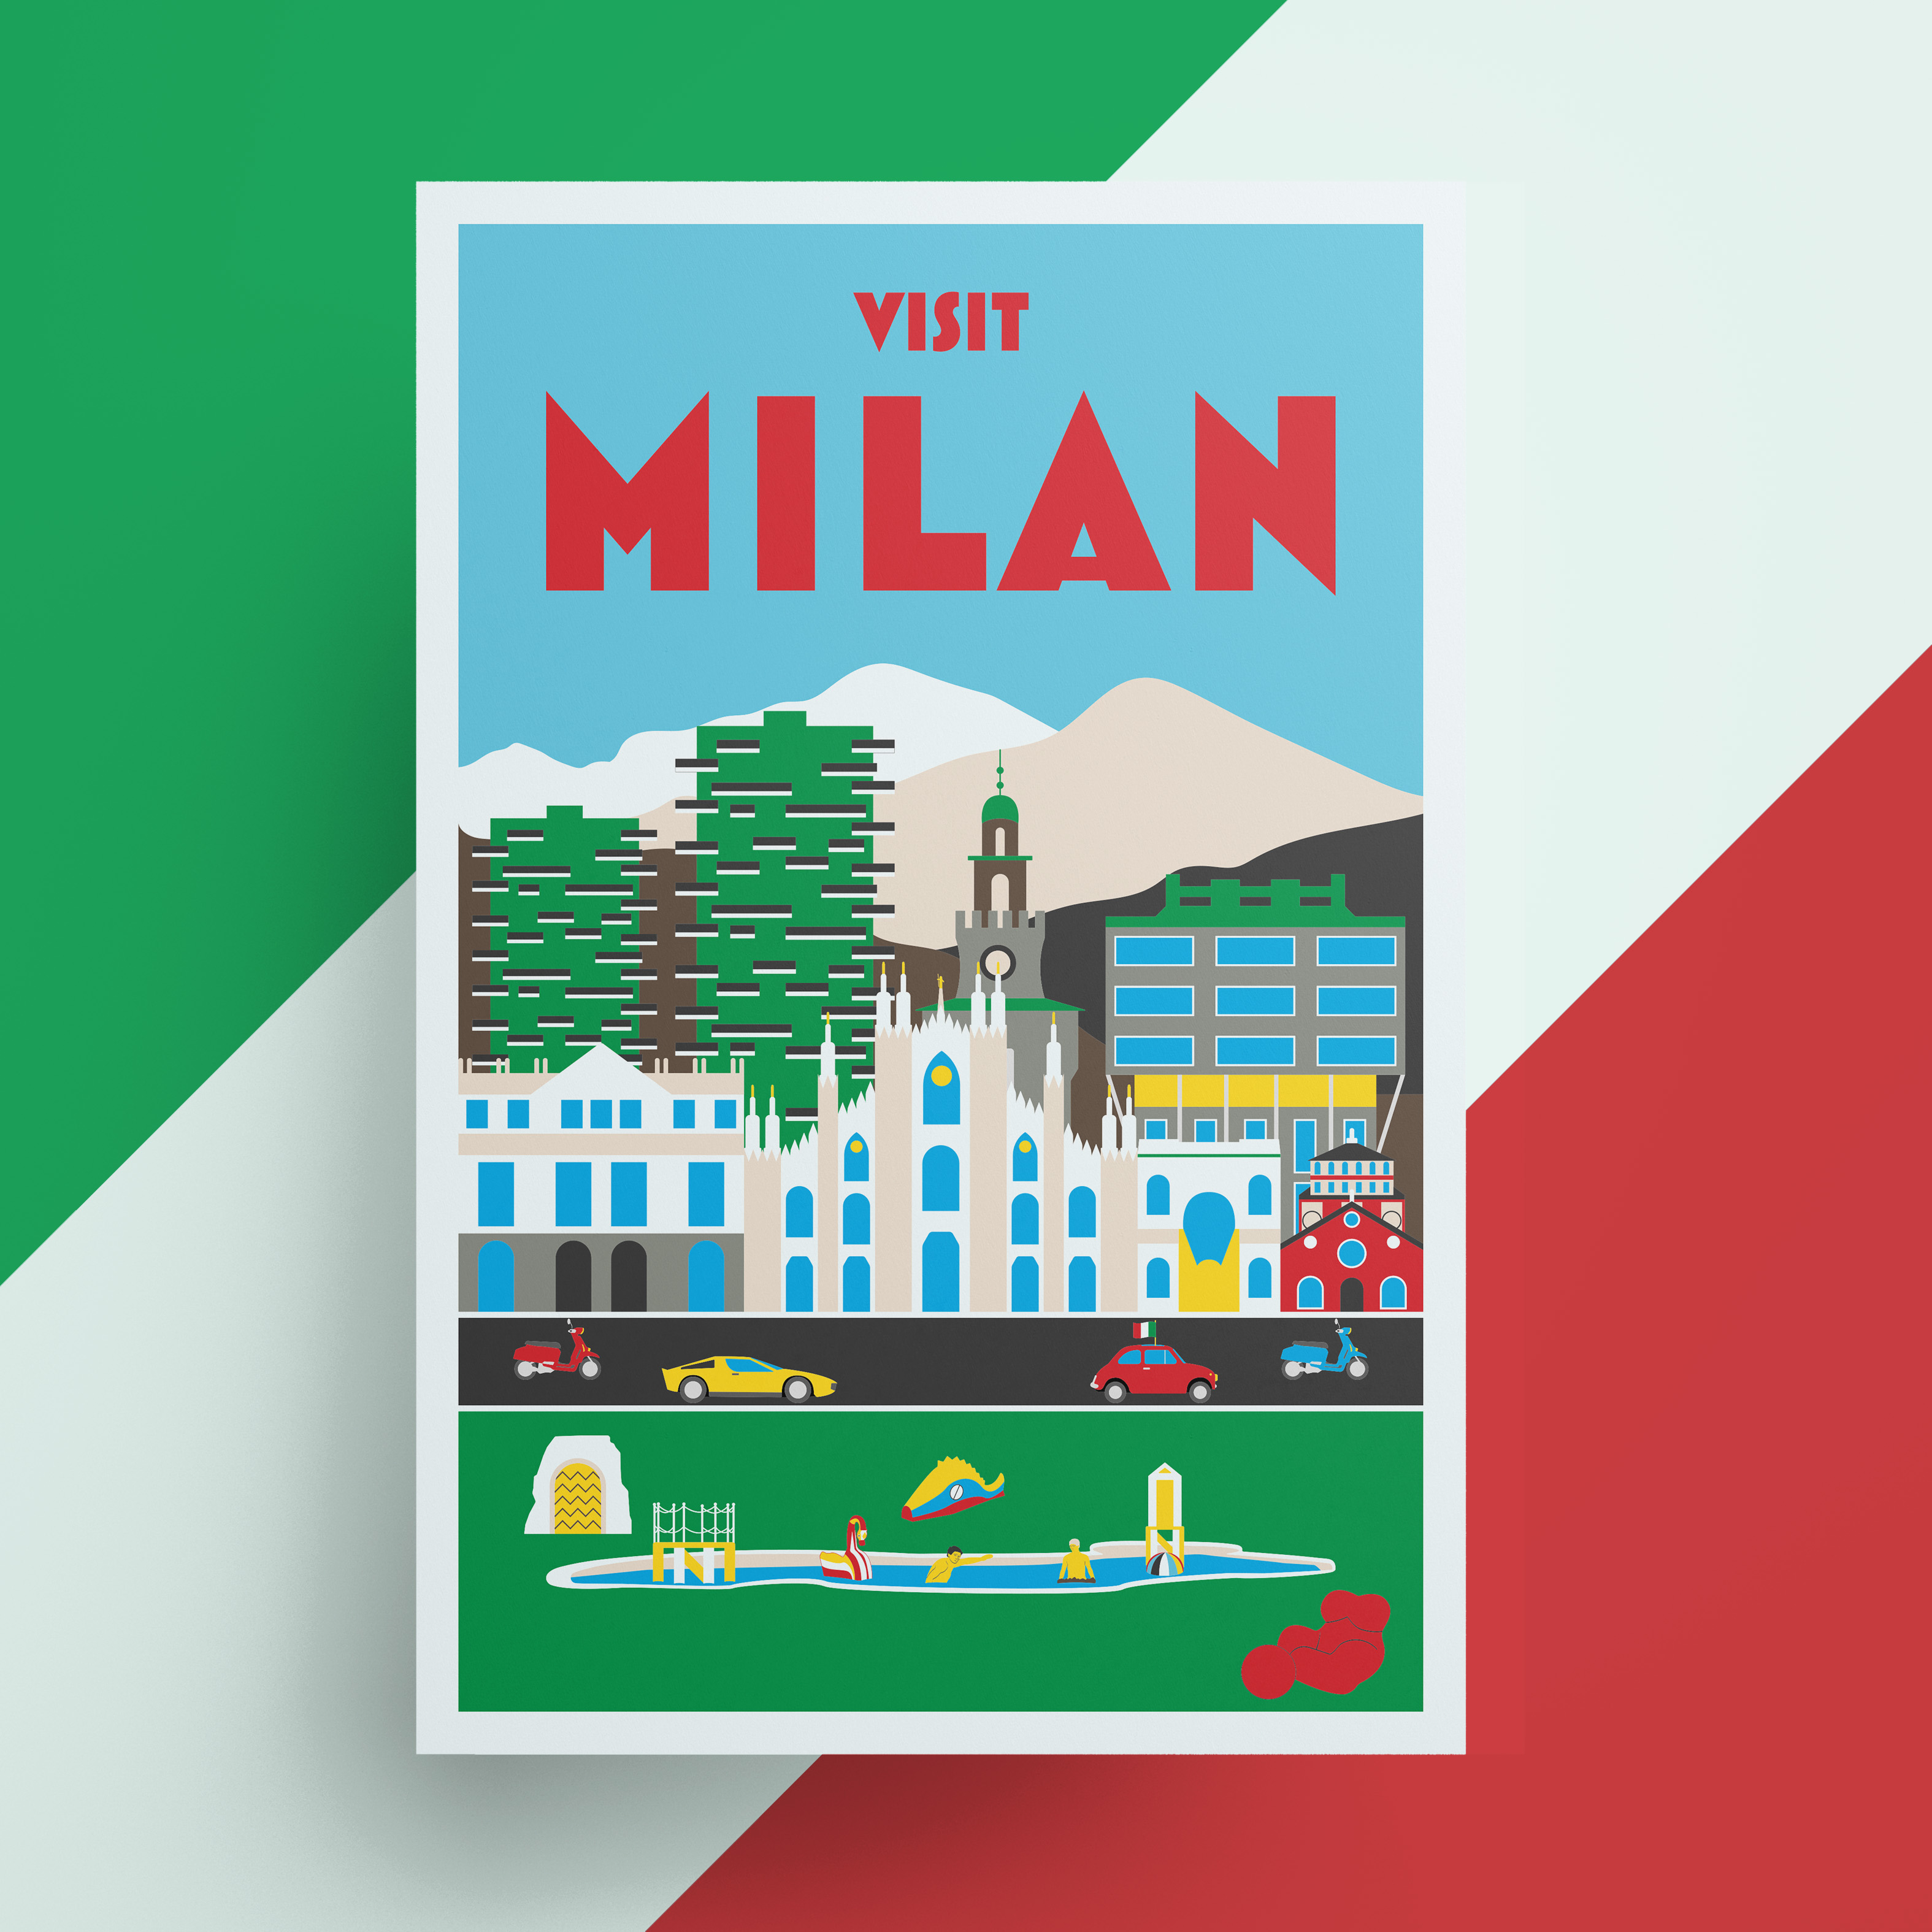 Milan Italy travel poster by Rexx DeMarzio on Dribbble